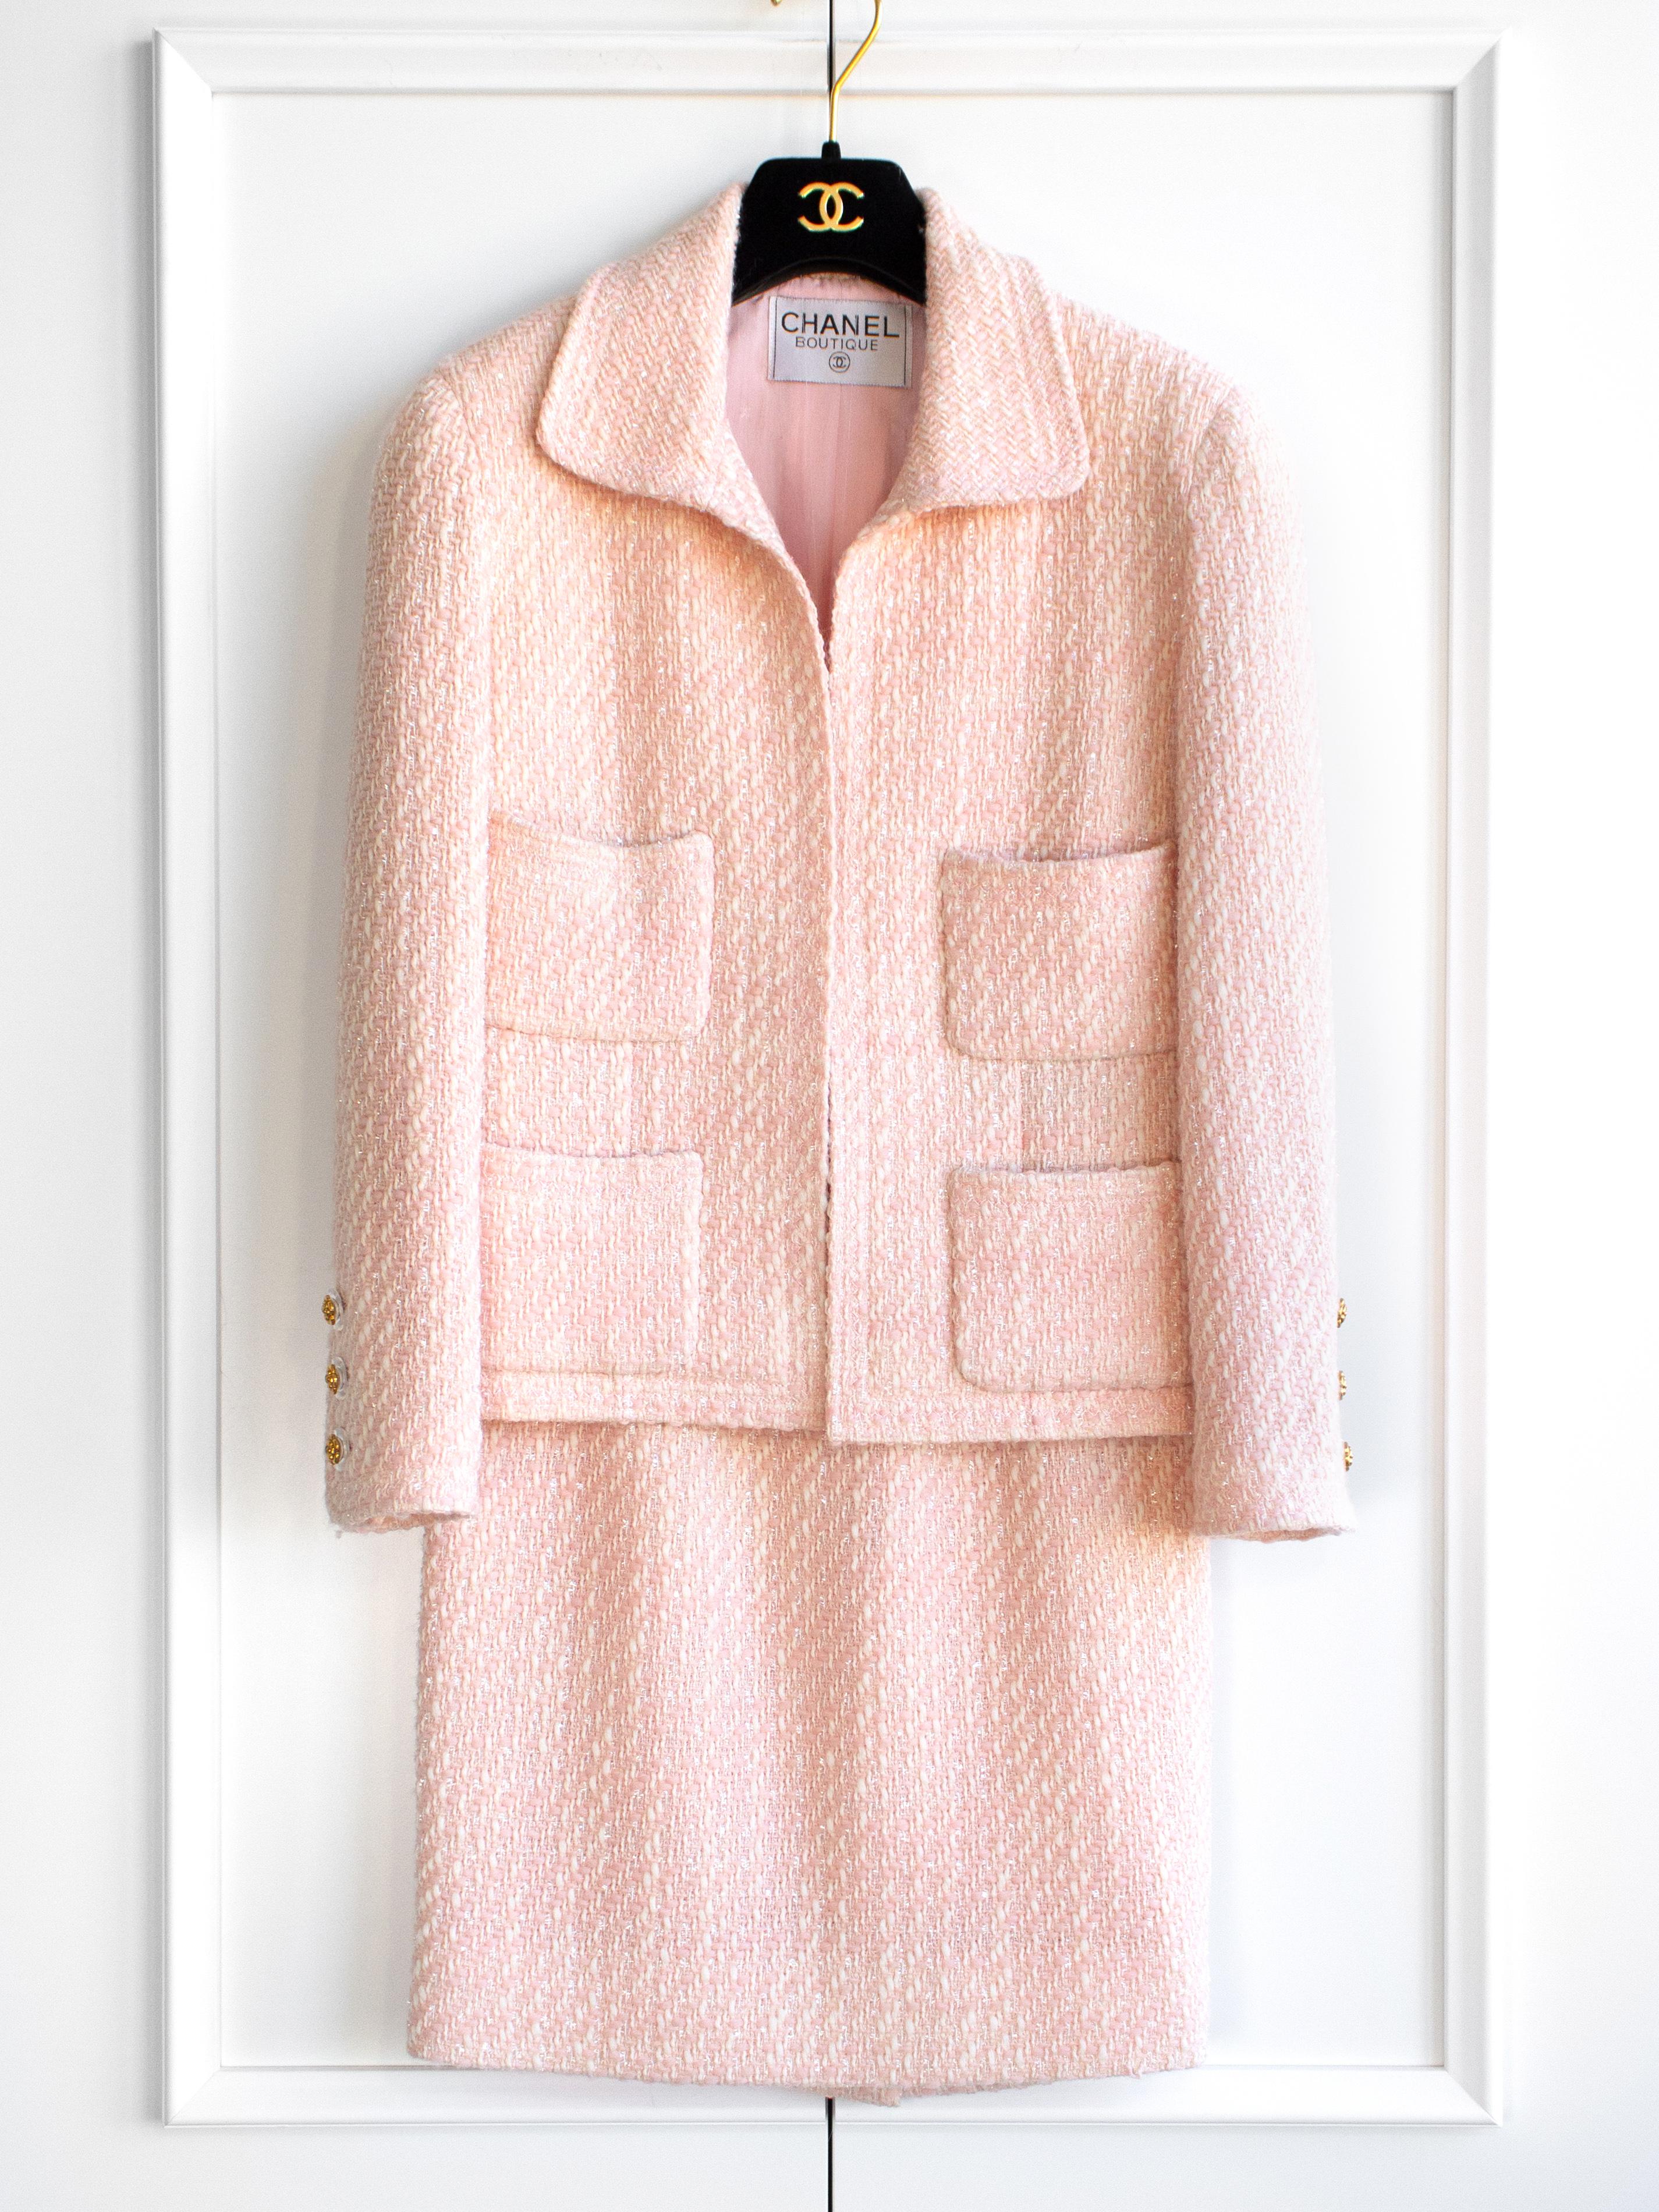 Rare Chanel Vintage S/S 1992 Pink Tweed Gold Camellia Jacket Skirt Suit In Good Condition For Sale In Jersey City, NJ